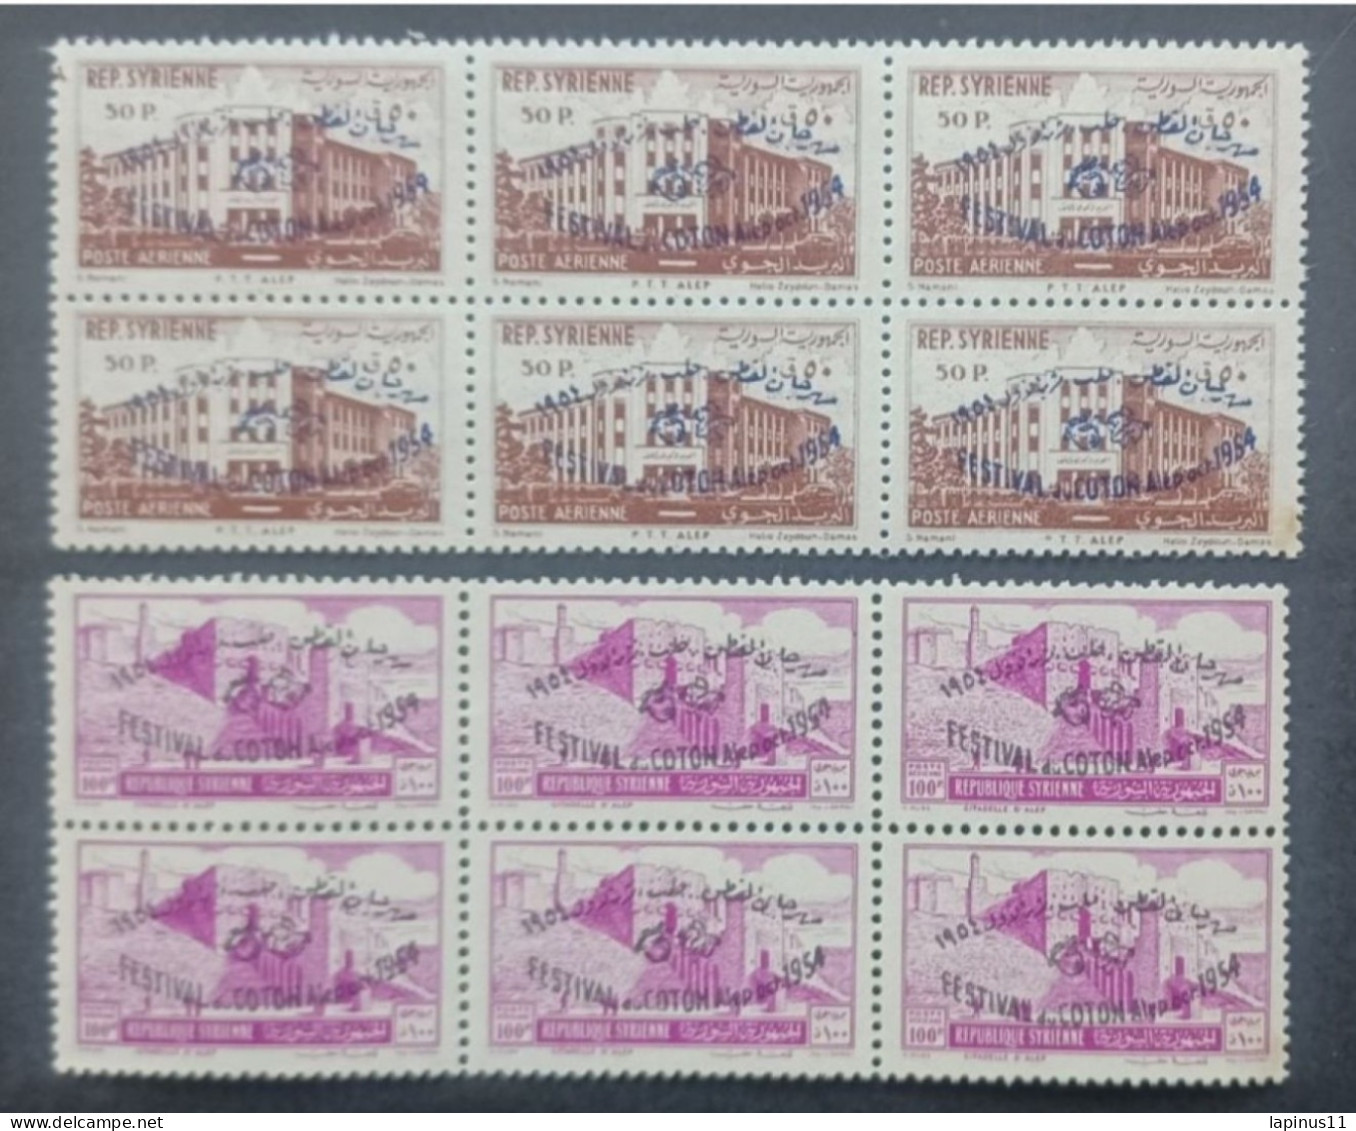 SYRIE سوريا SYRIA 1954 AIRMAIL COTTON FESTIVAL CAT YVERT N 54/55 - Syria